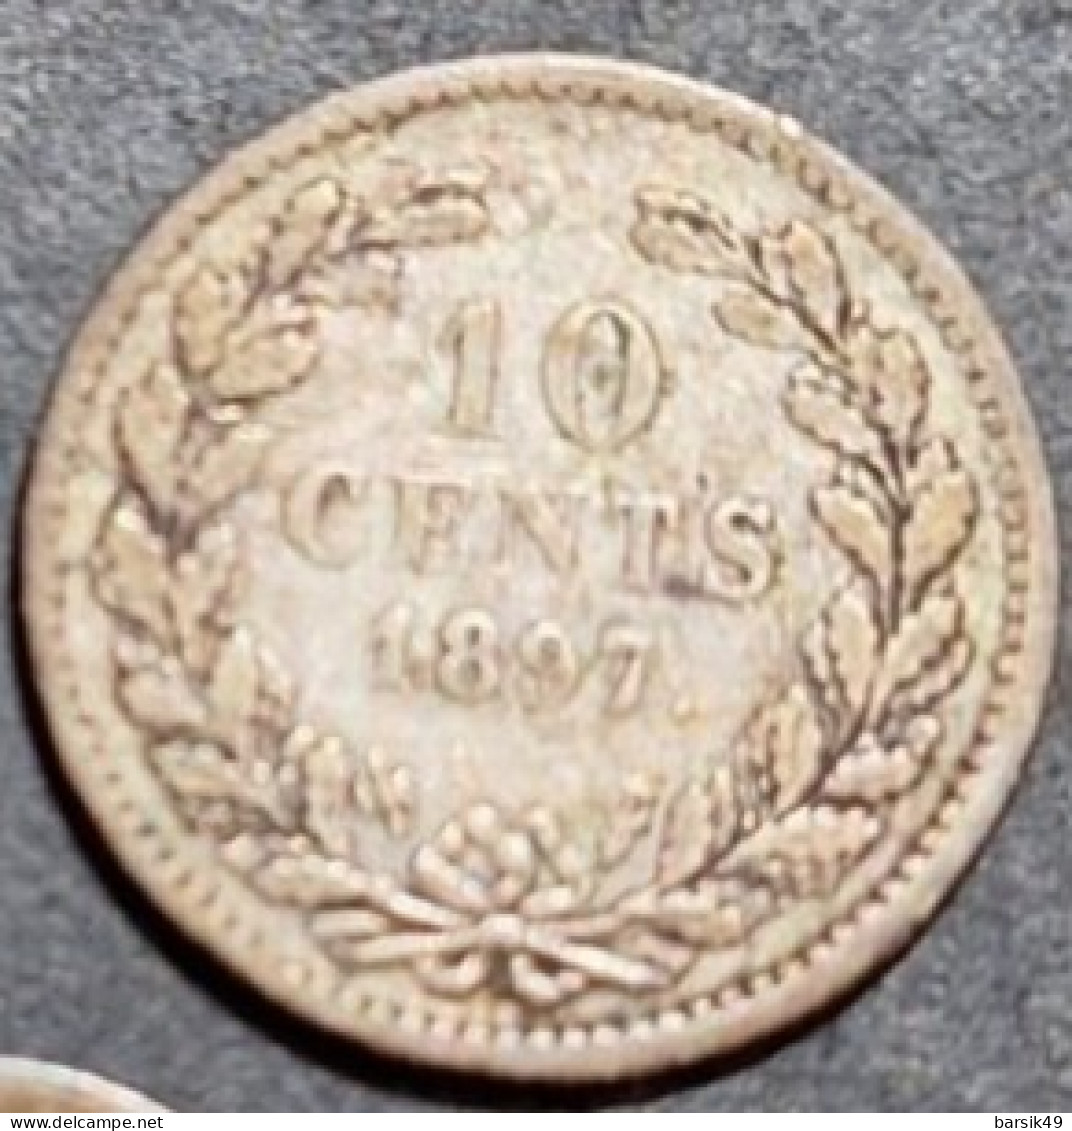 1897 Pays-Bas Netherlands Silver 10 Cents - 10 Cent